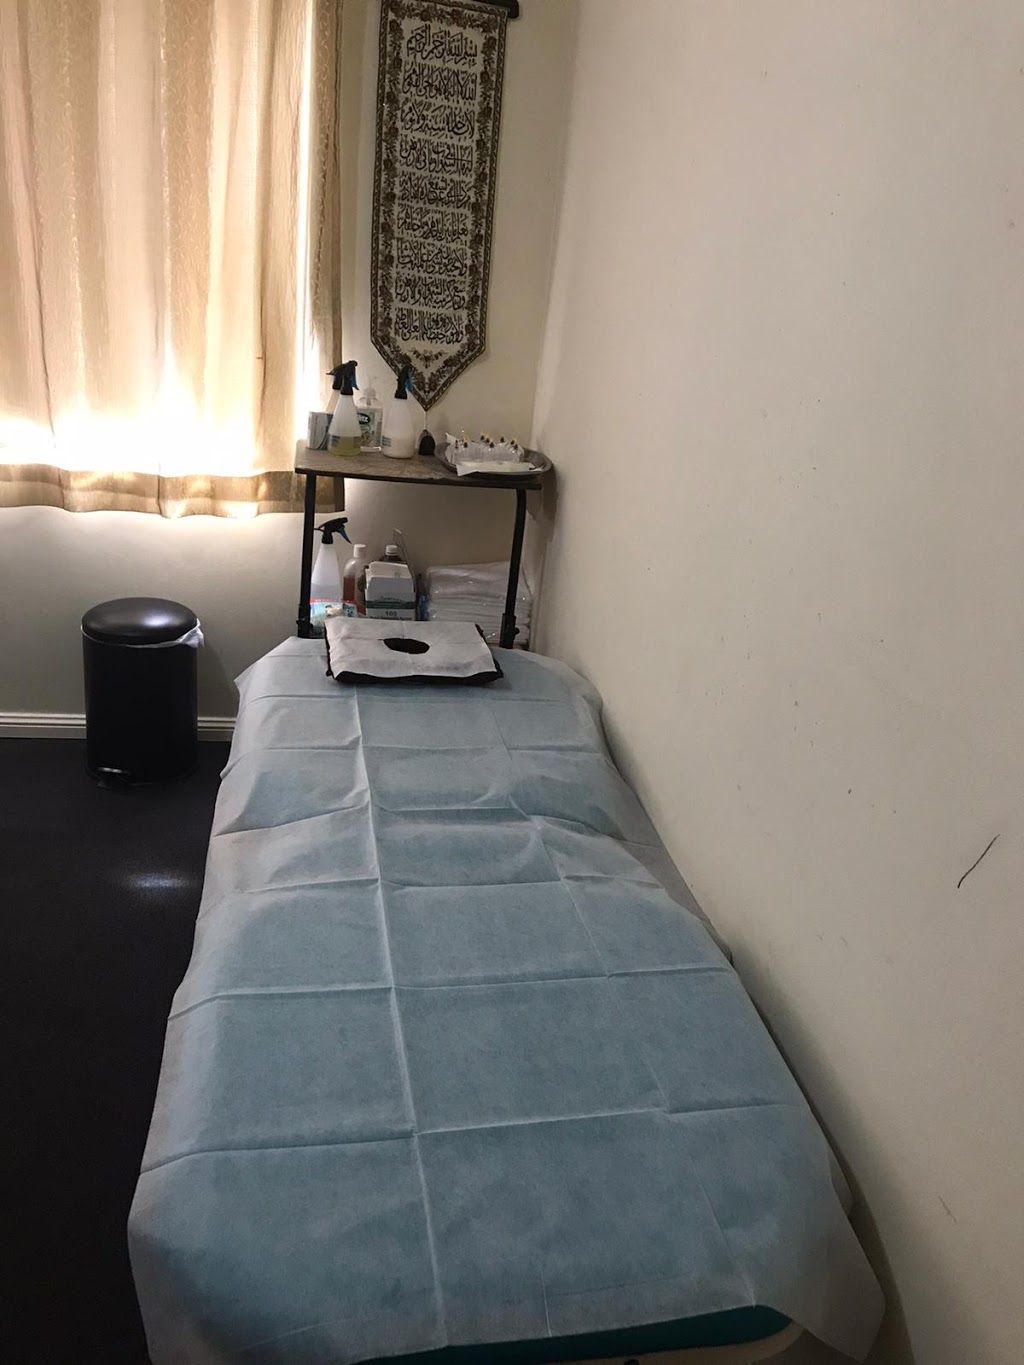 ZARA Natural Therapy(Hijama for ladies only) | health | Unit 8/3-11 Normanby Rd, Auburn NSW 2144, Australia | 0468483989 OR +61 468 483 989